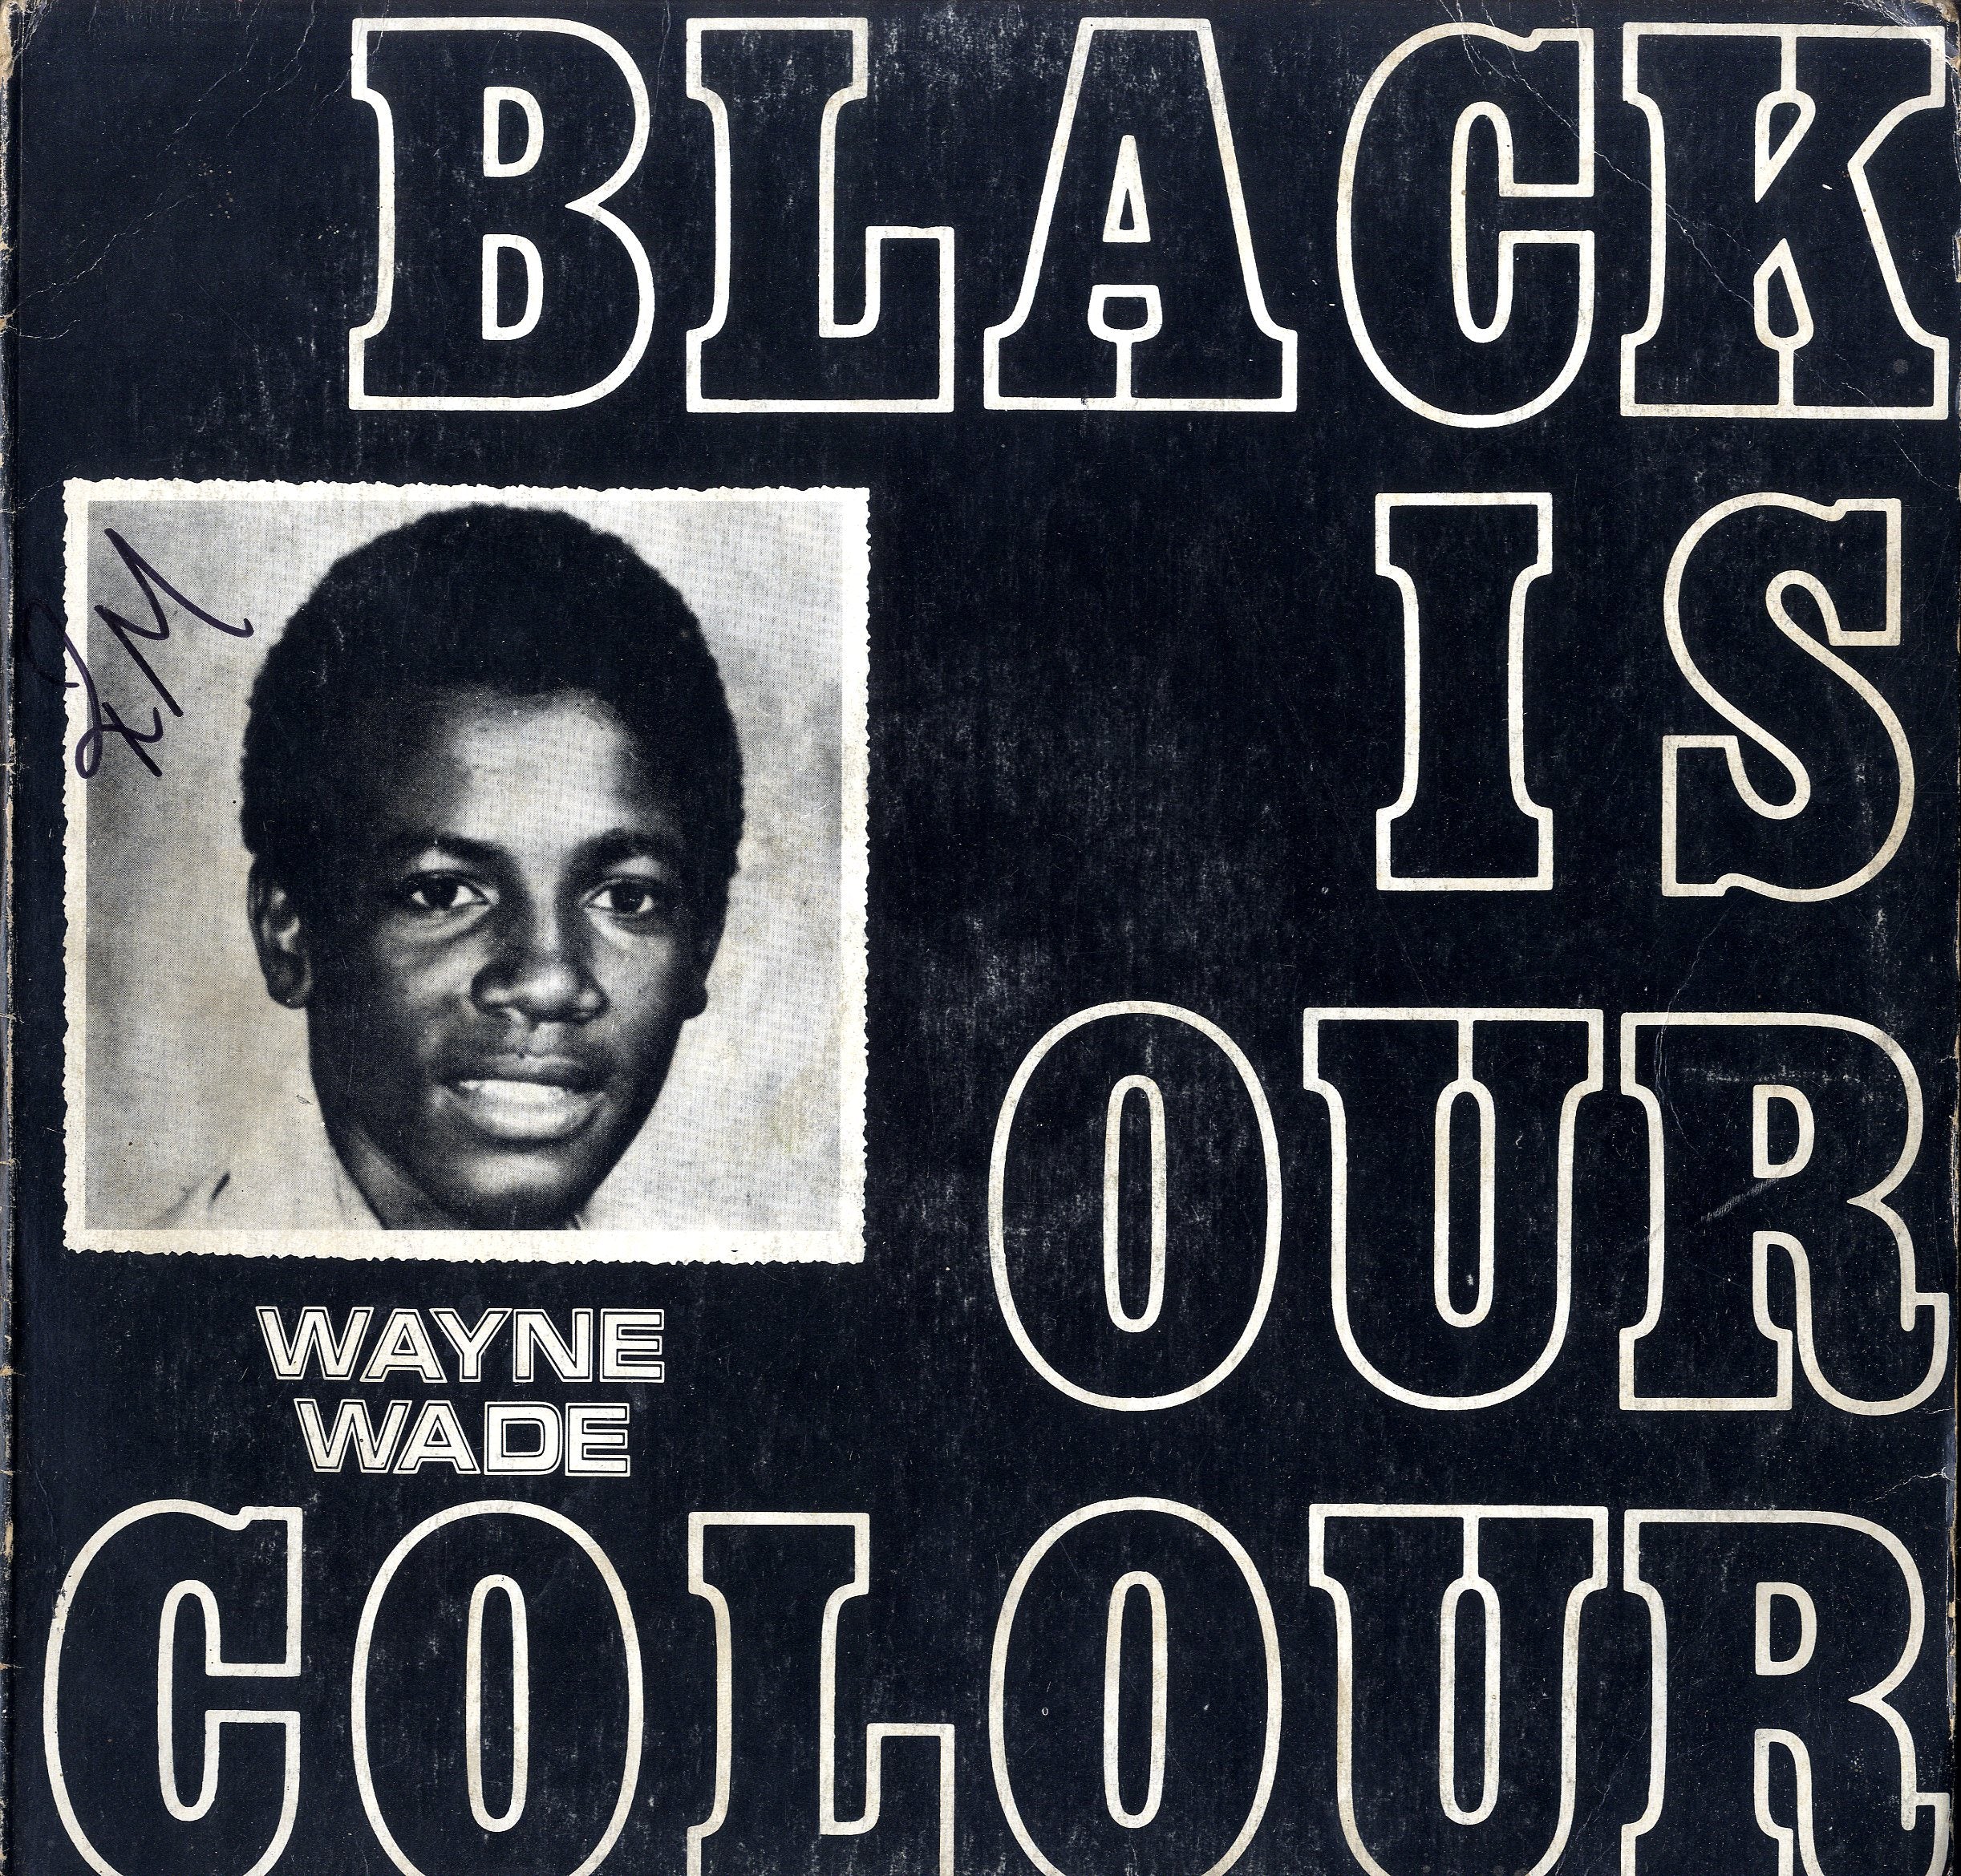 WAYNE WADE [Black Is Our Colour]